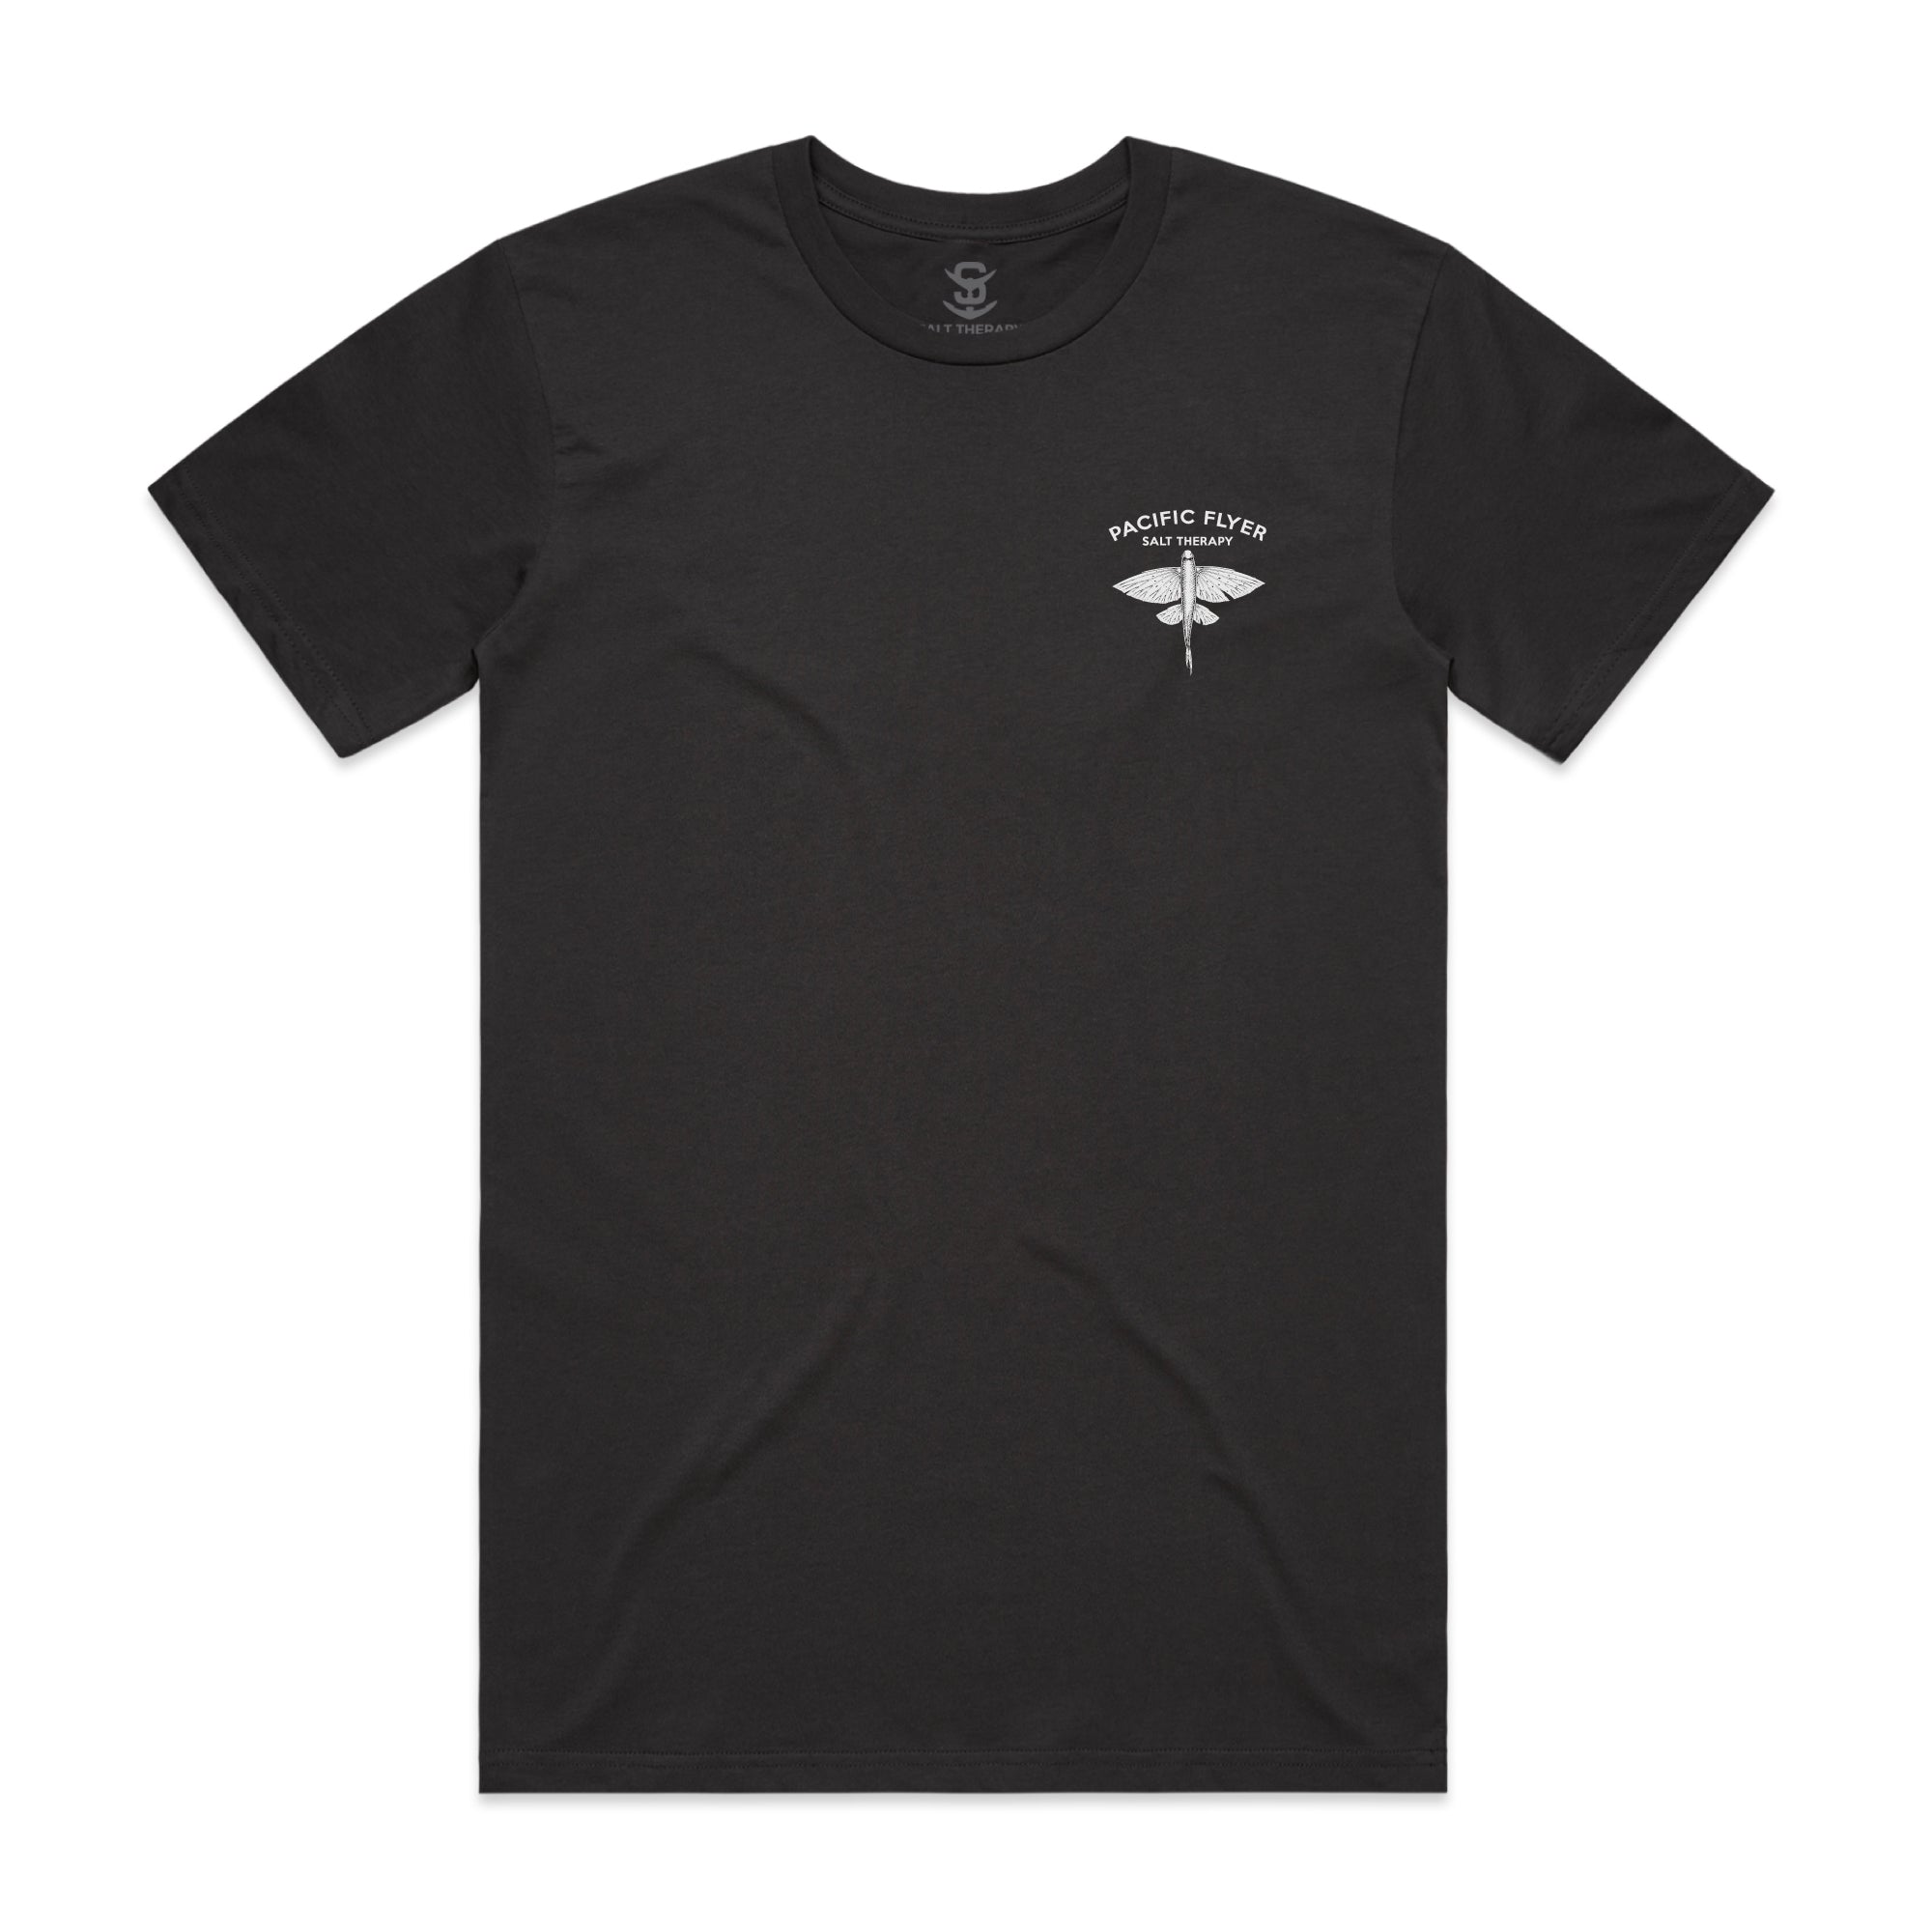 PACIFIC FLYER YOUTH TEE